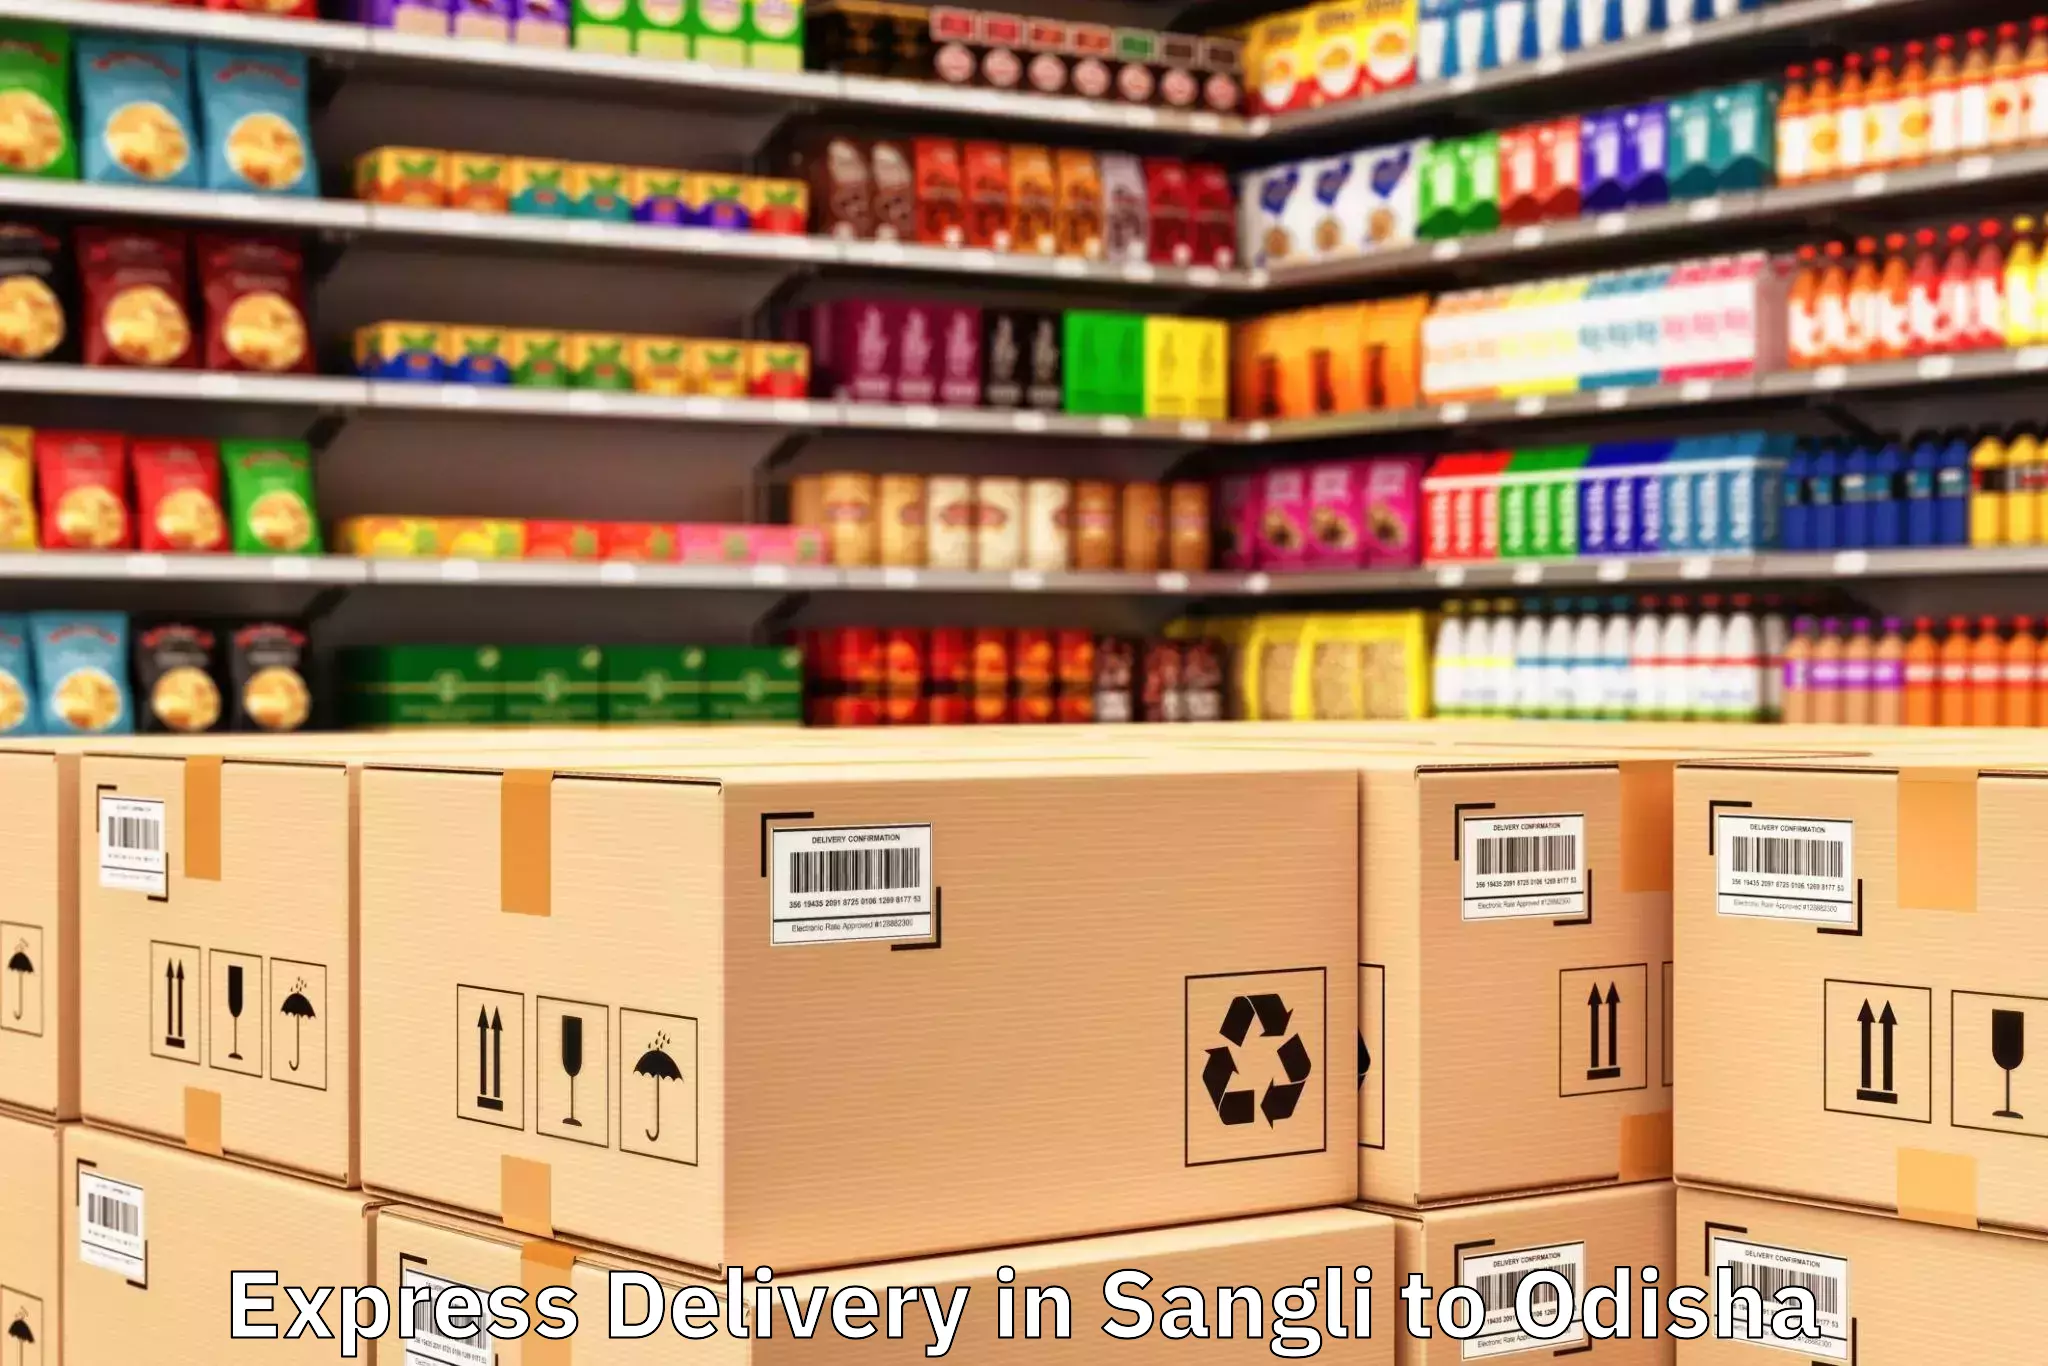 Leading Sangli to Dandisahi Express Delivery Provider